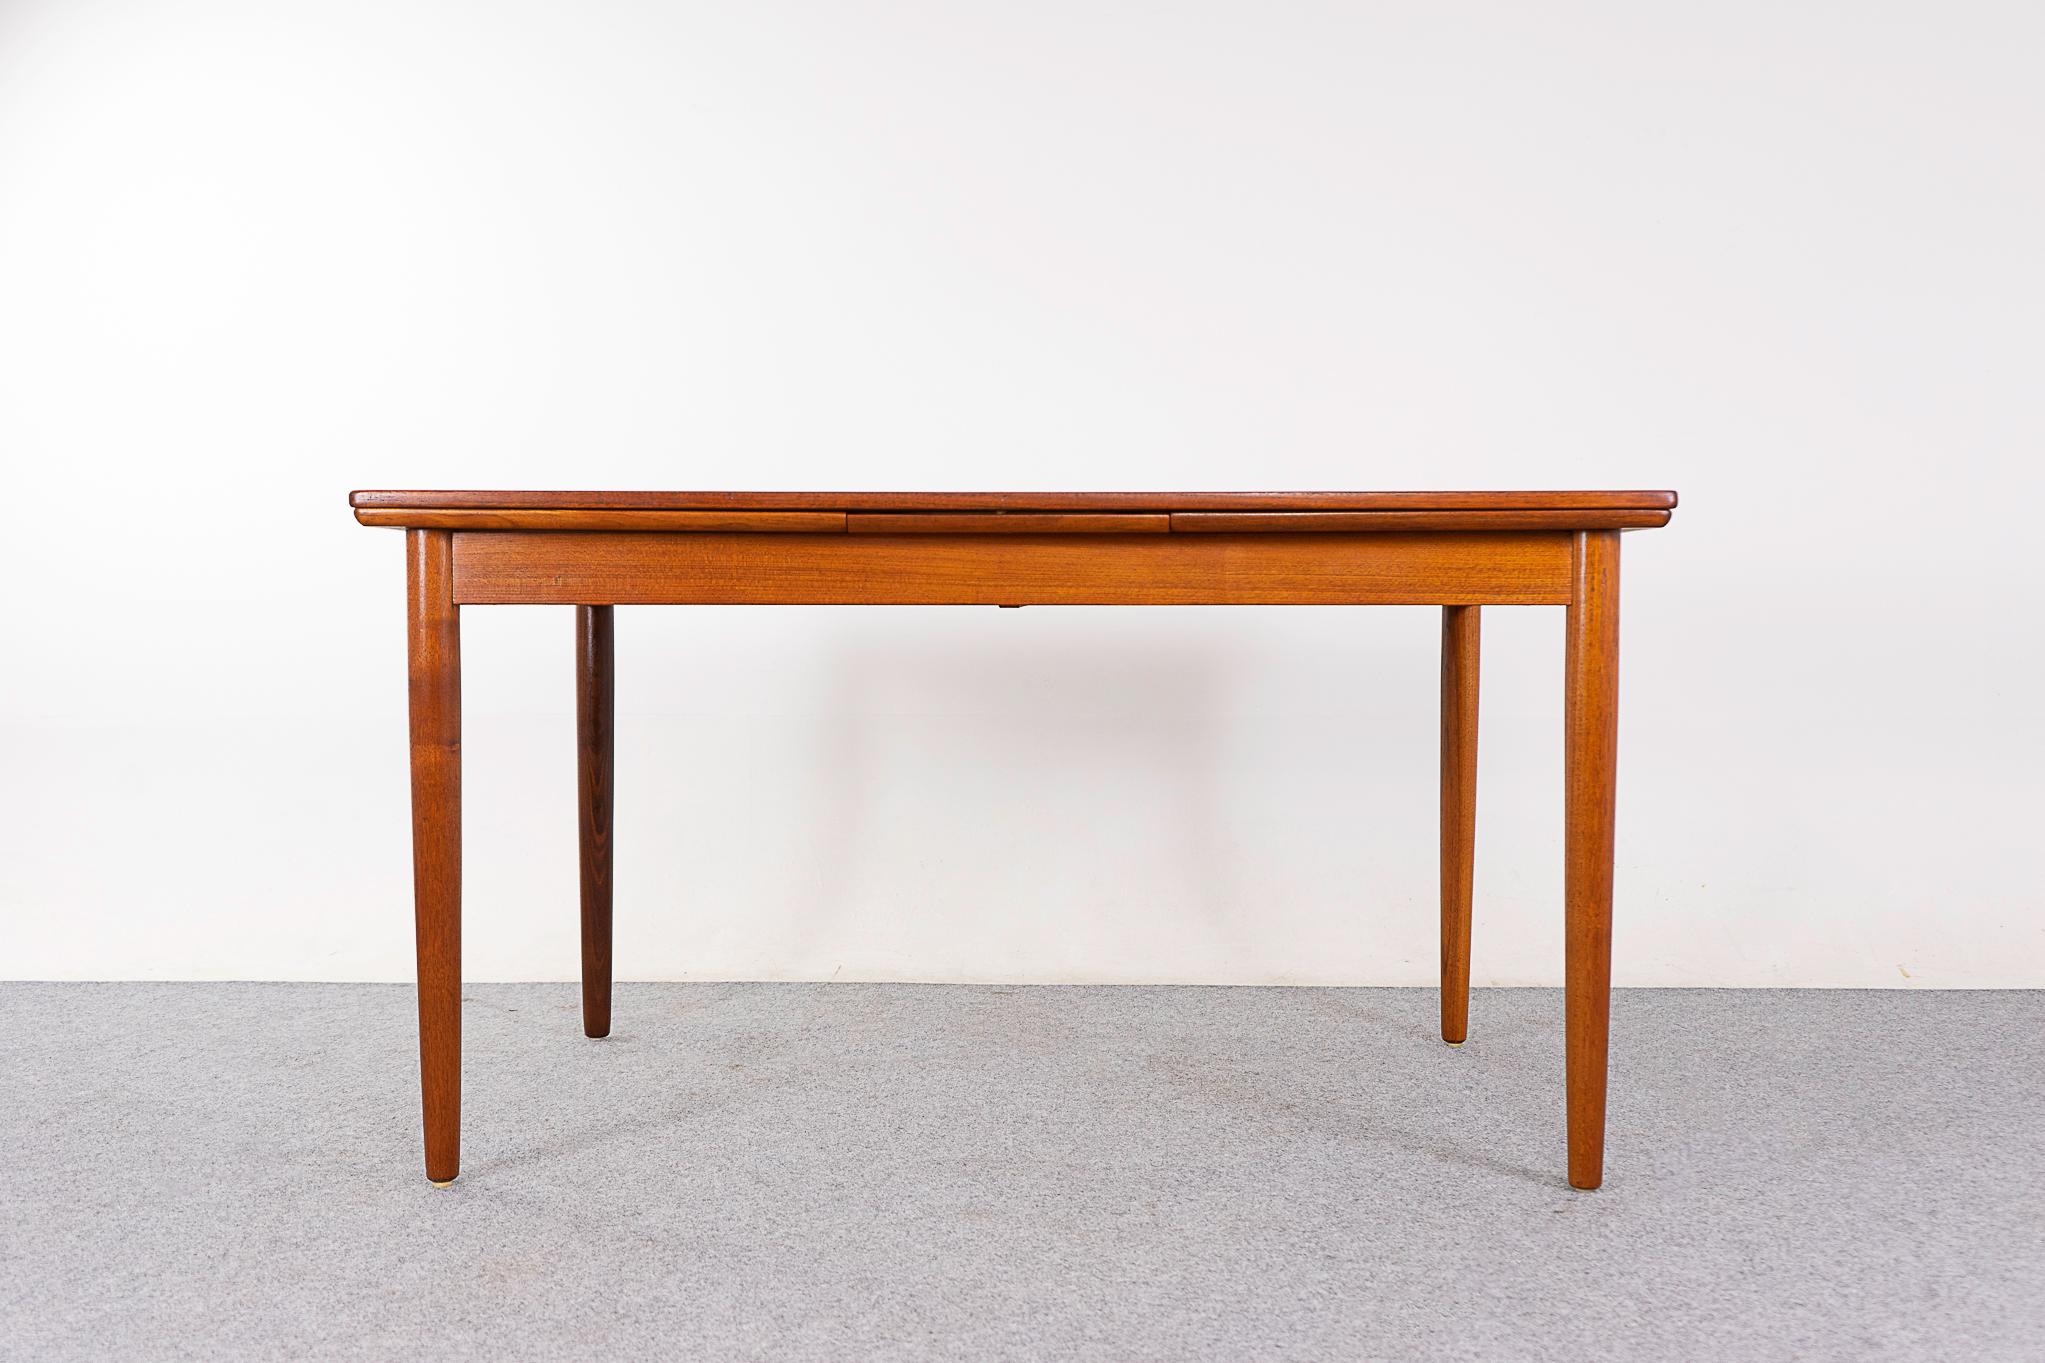 Teak draw leaf dining table, circa 1960's. Self-storing leaves slide out from each end to expand the table surface by nearly two times, versatile! Sleek tapering elegant legs. A beautiful combination of solid wood edges and center panels with